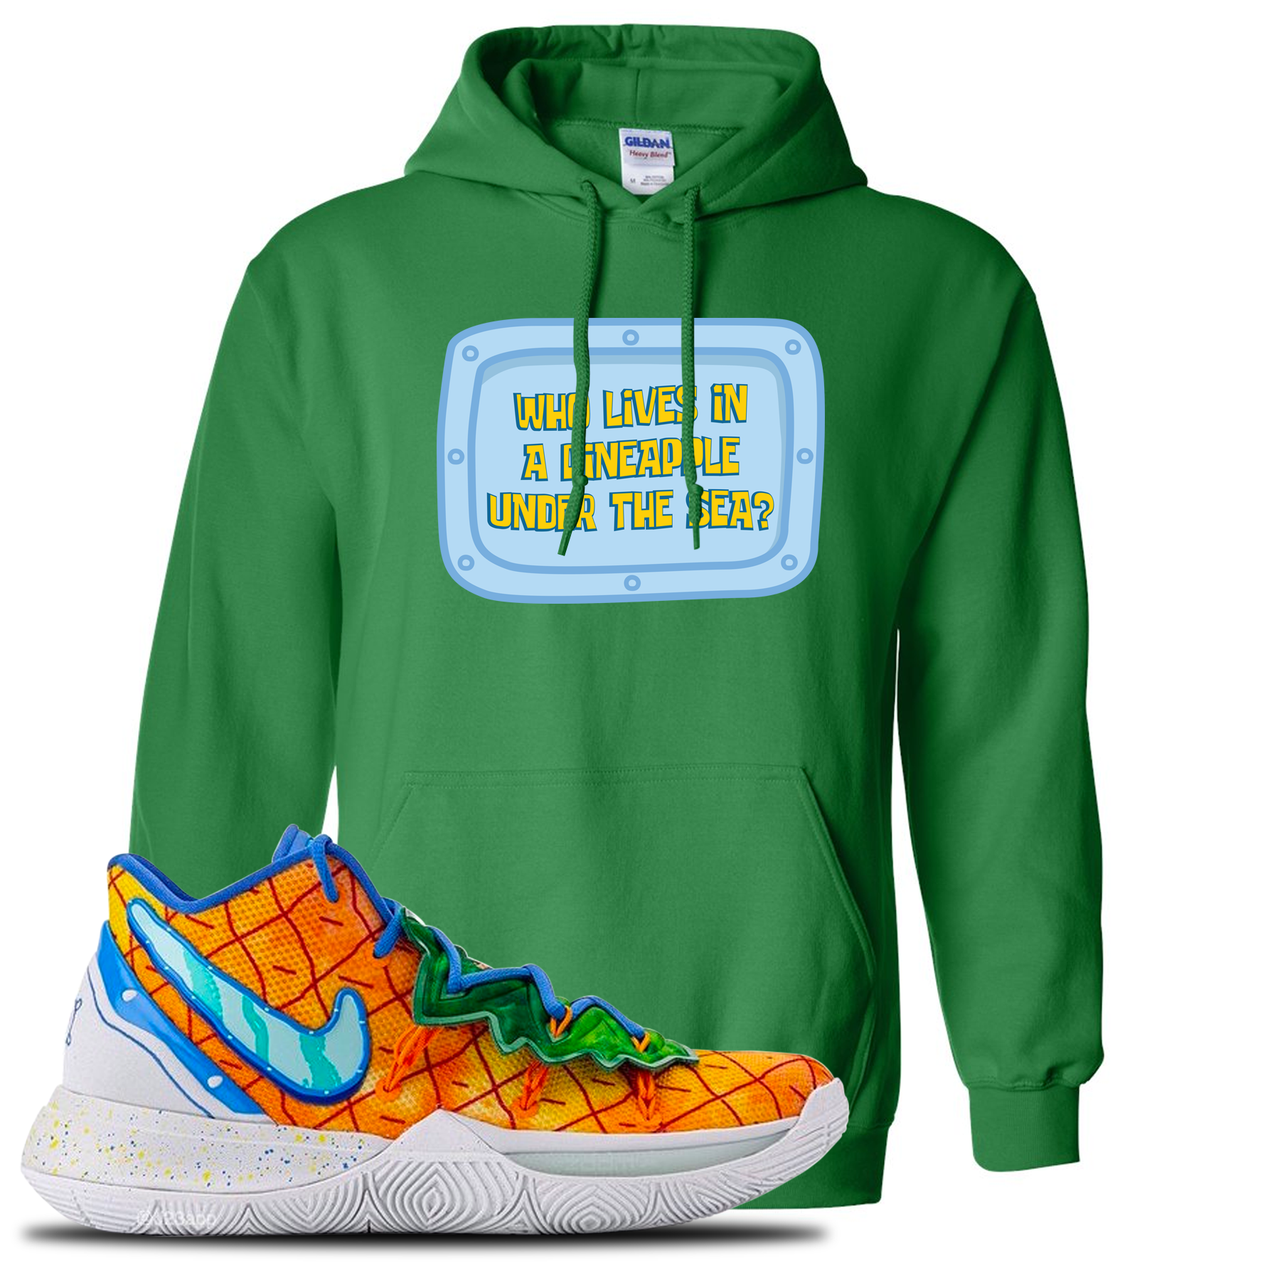 Kyrie 5 Pineapple House Who Lives in a Pineapple Under the Sea? Irish Green Sneaker Hook Up Pullover Hoodie